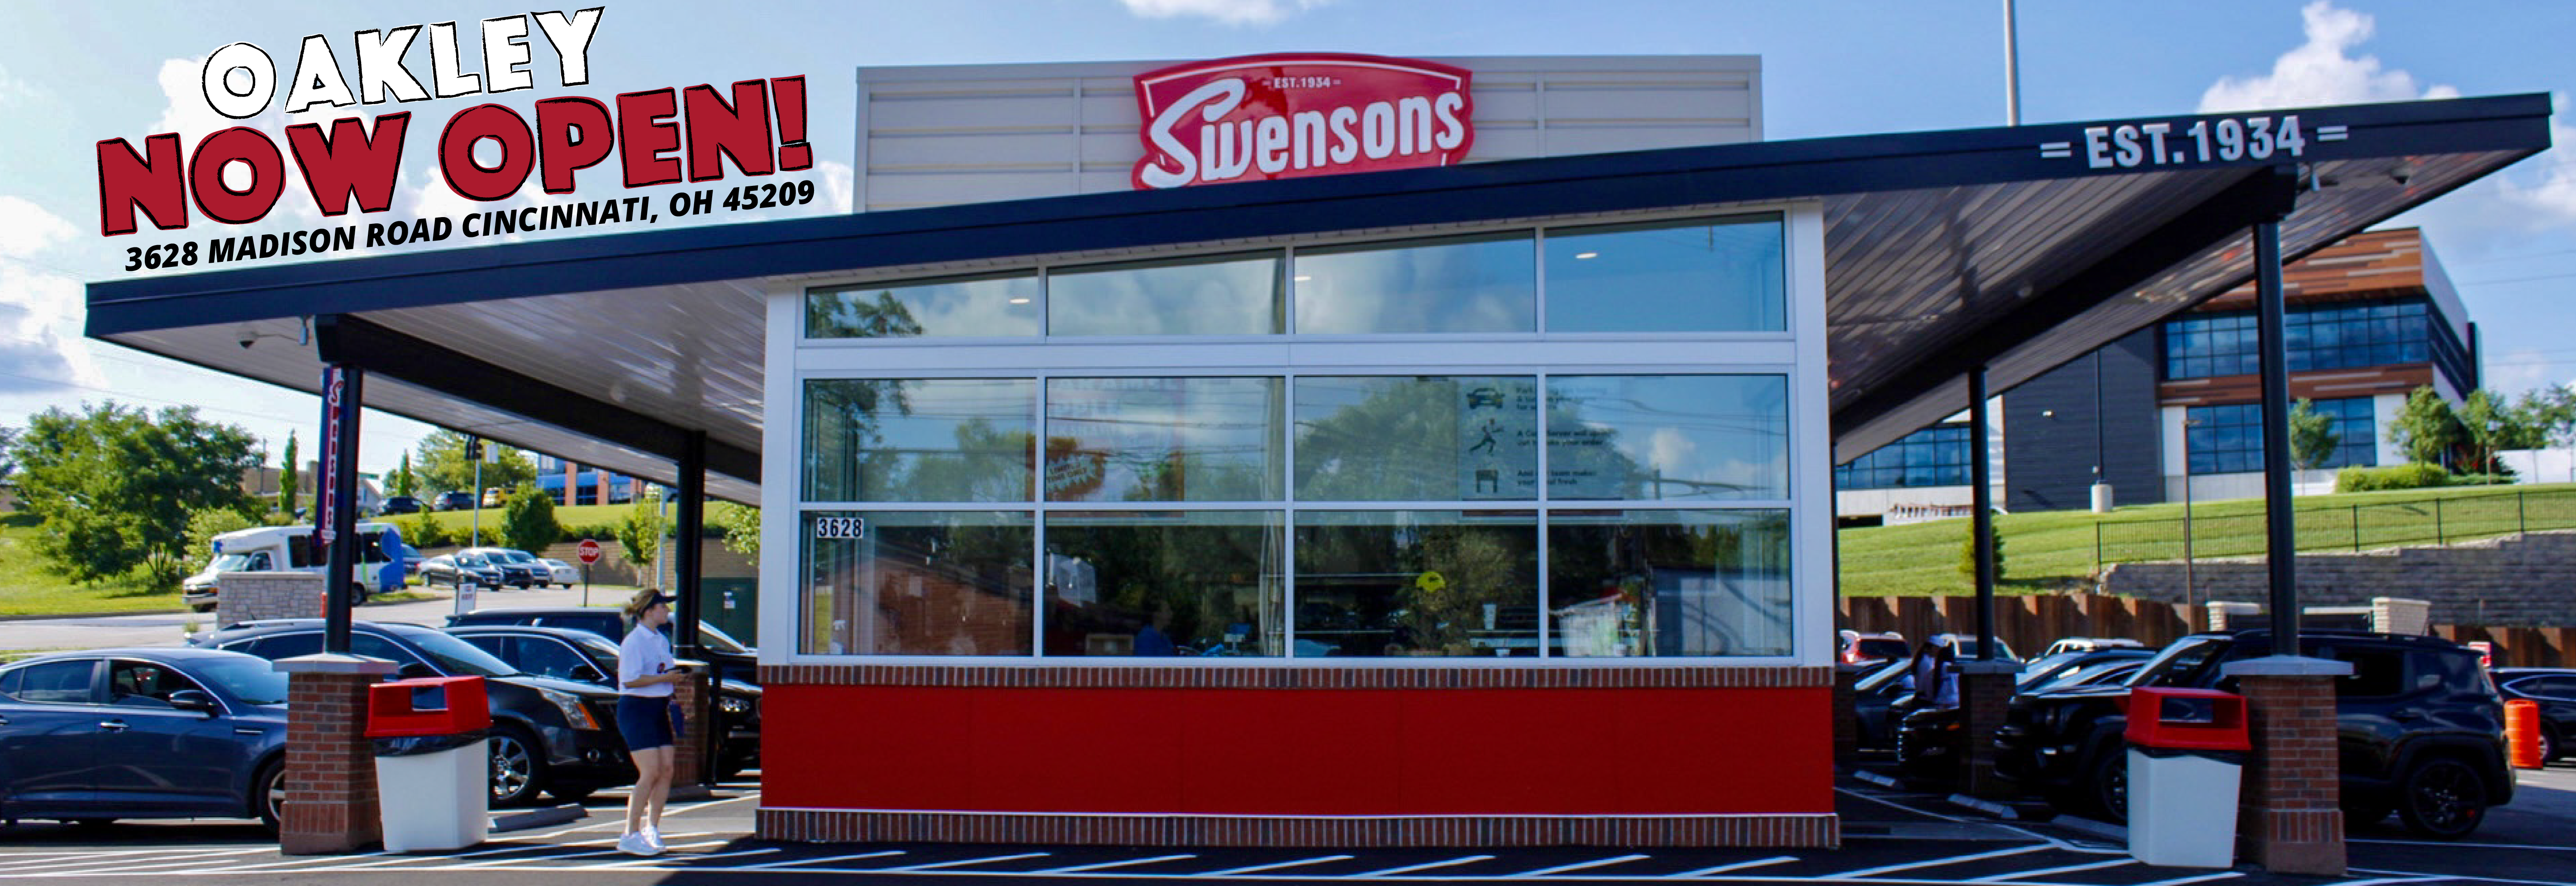 Swensons Drive-In, Home Of The Galley Boy®, "Americas Best Cheeseburger" | Burgers, Sandwiches, Milkshakes & more. | Best Cheeseburger in Ohio